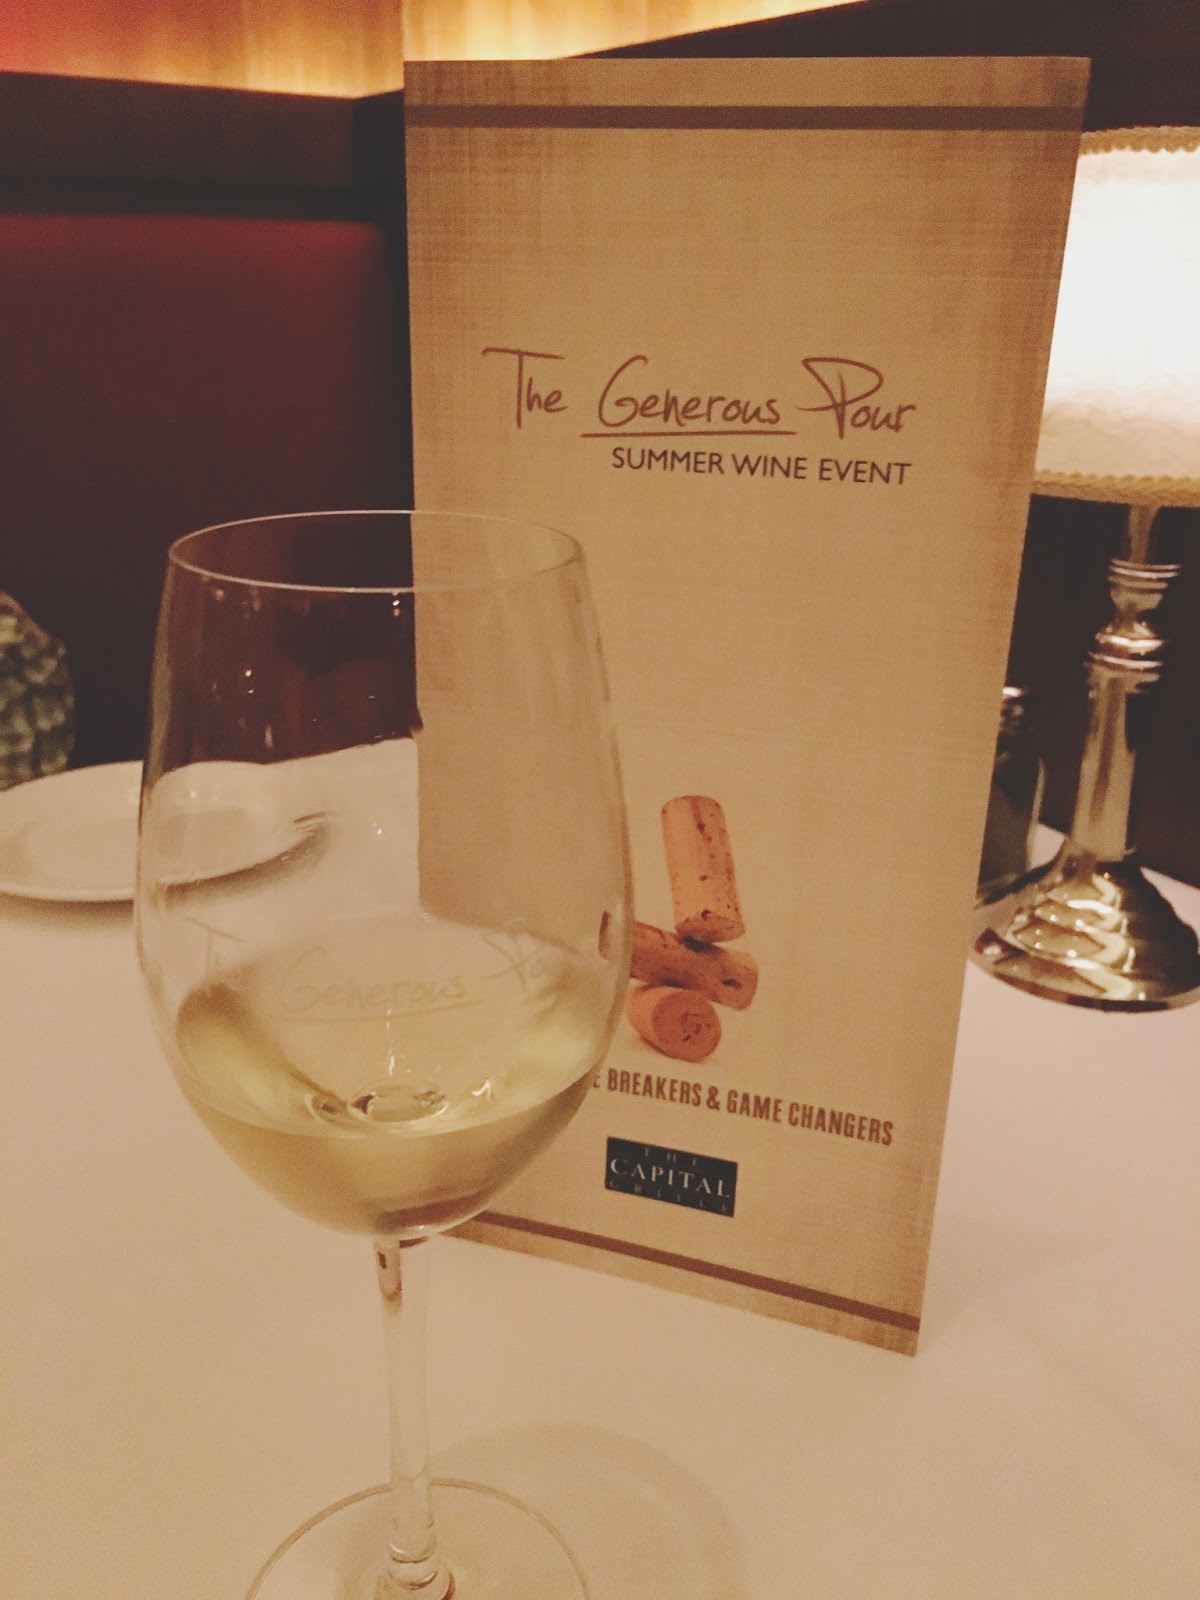 The Generous Pour Summer Wine Event at The Capital Grille - A restaurant in Houston, Texas